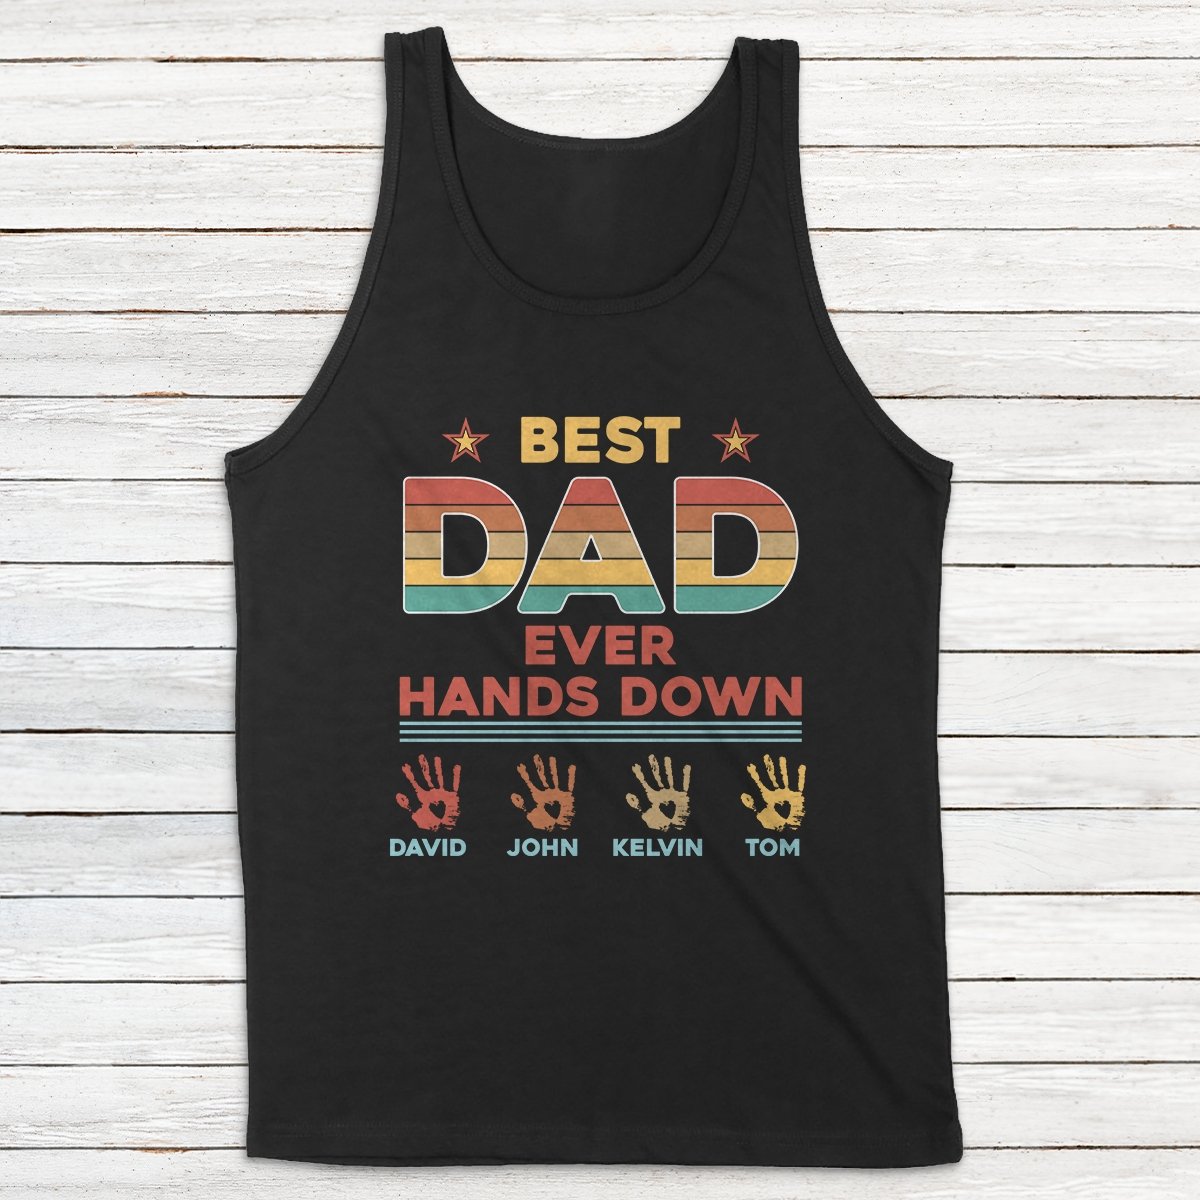 Best Dad Ever Hands Down Personalized Shirt